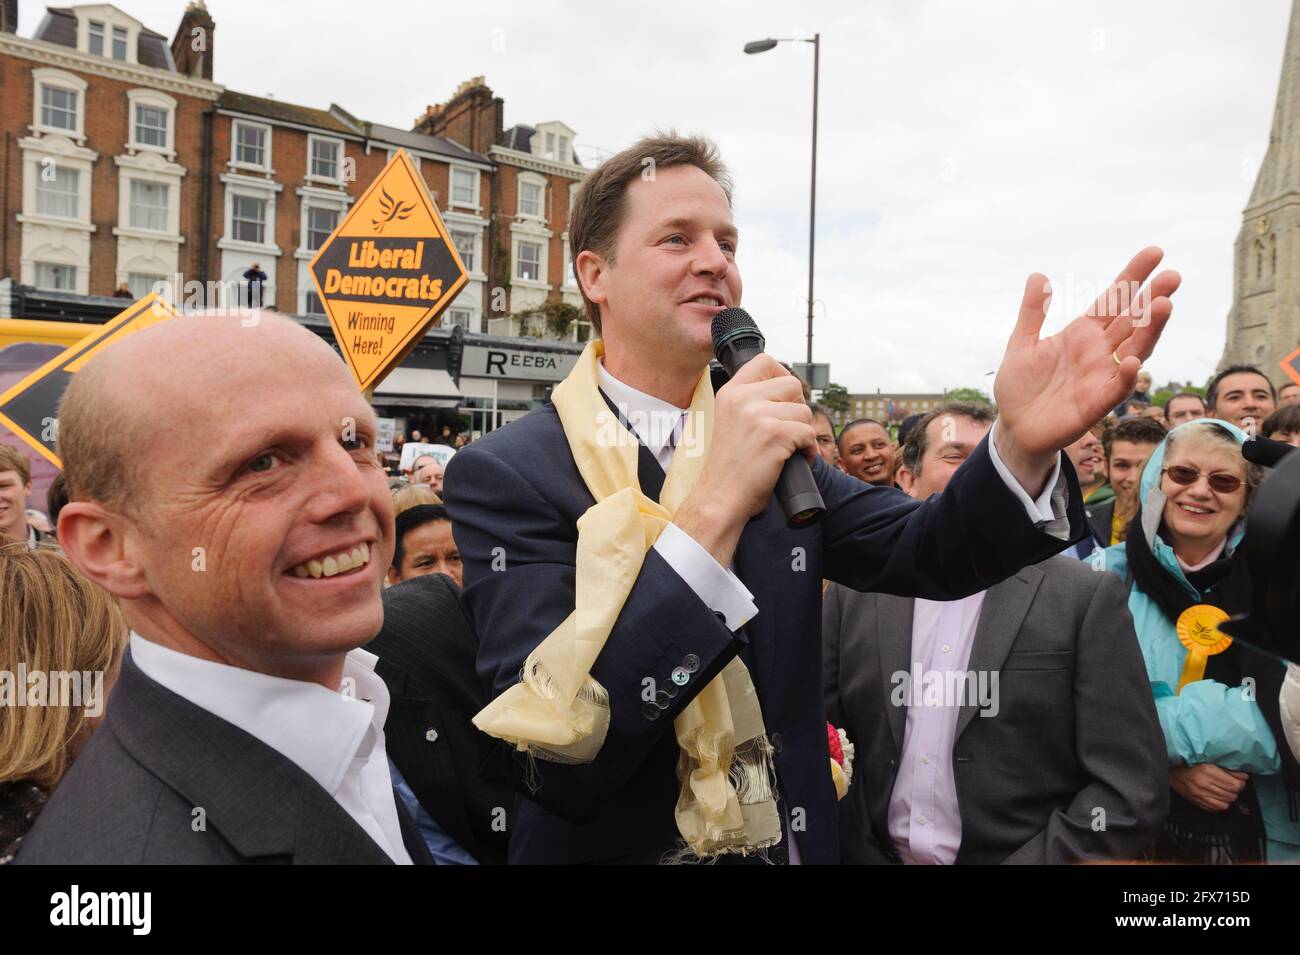 Nick Clegg, leader of the Liberal Democrats, campaigning in the 2010 general election at a public rally.  Montpelier Vale, Blackheath, London, UK.  3 May 2010 Stock Photo